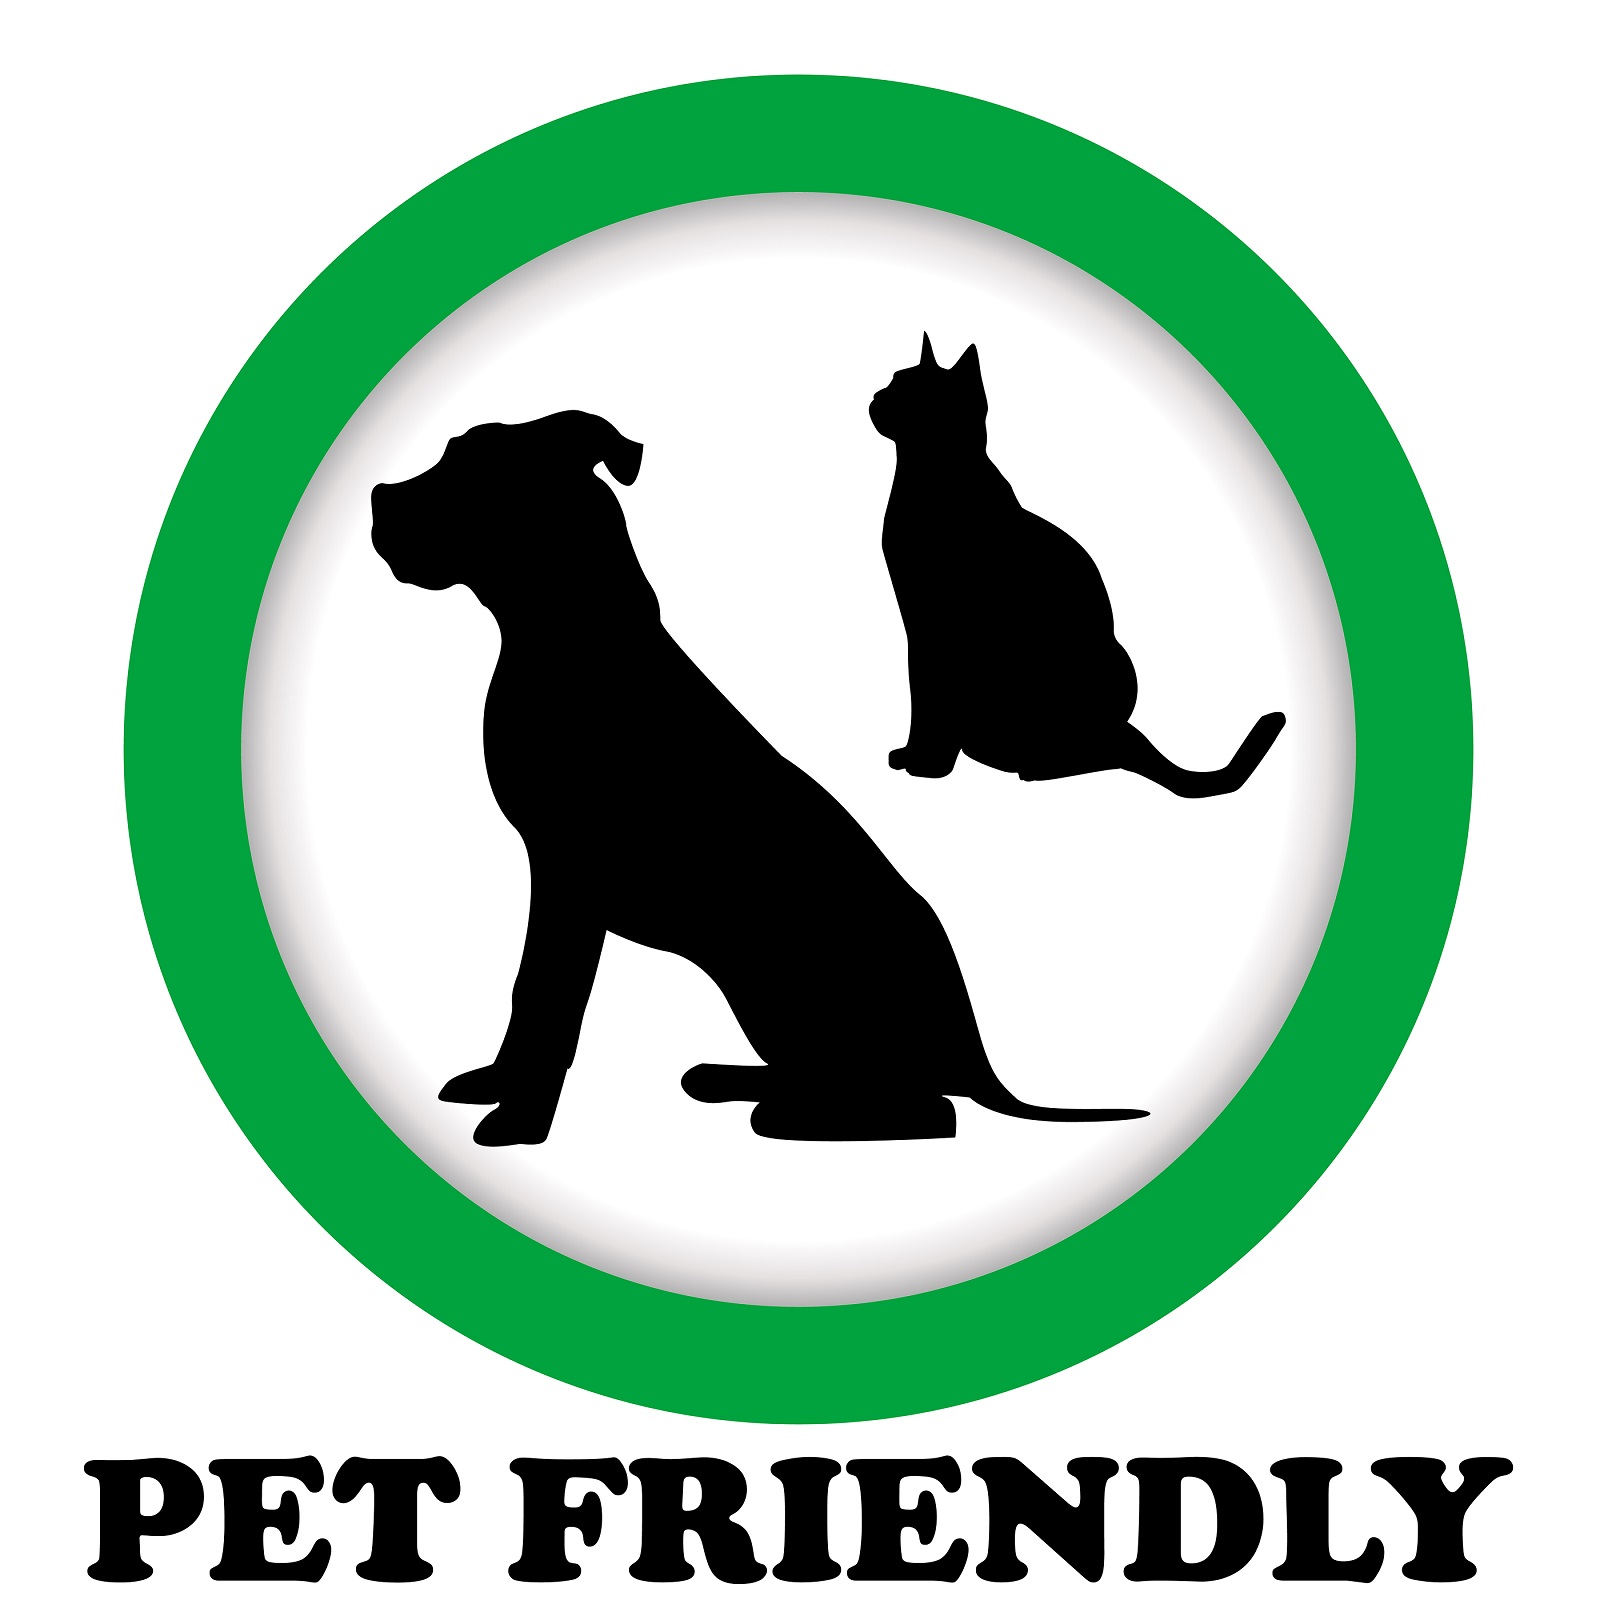 Pet friendly image for Jean-Luc Andriot website 052918